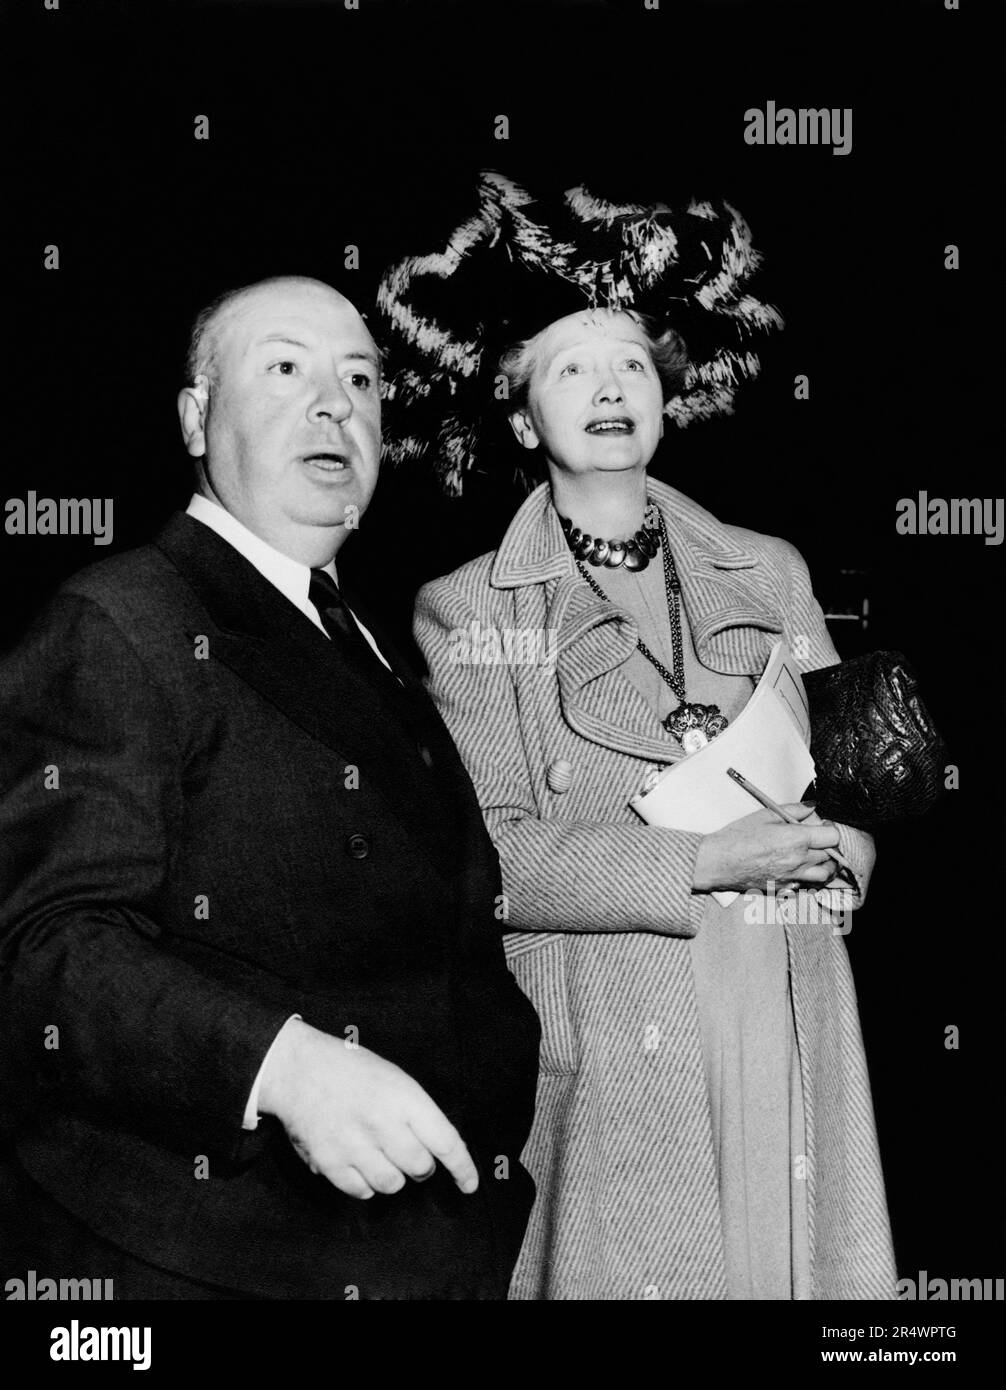 Alfred Hitchcock, Hedda Hopper attending a Hollywood party. Stock Photo